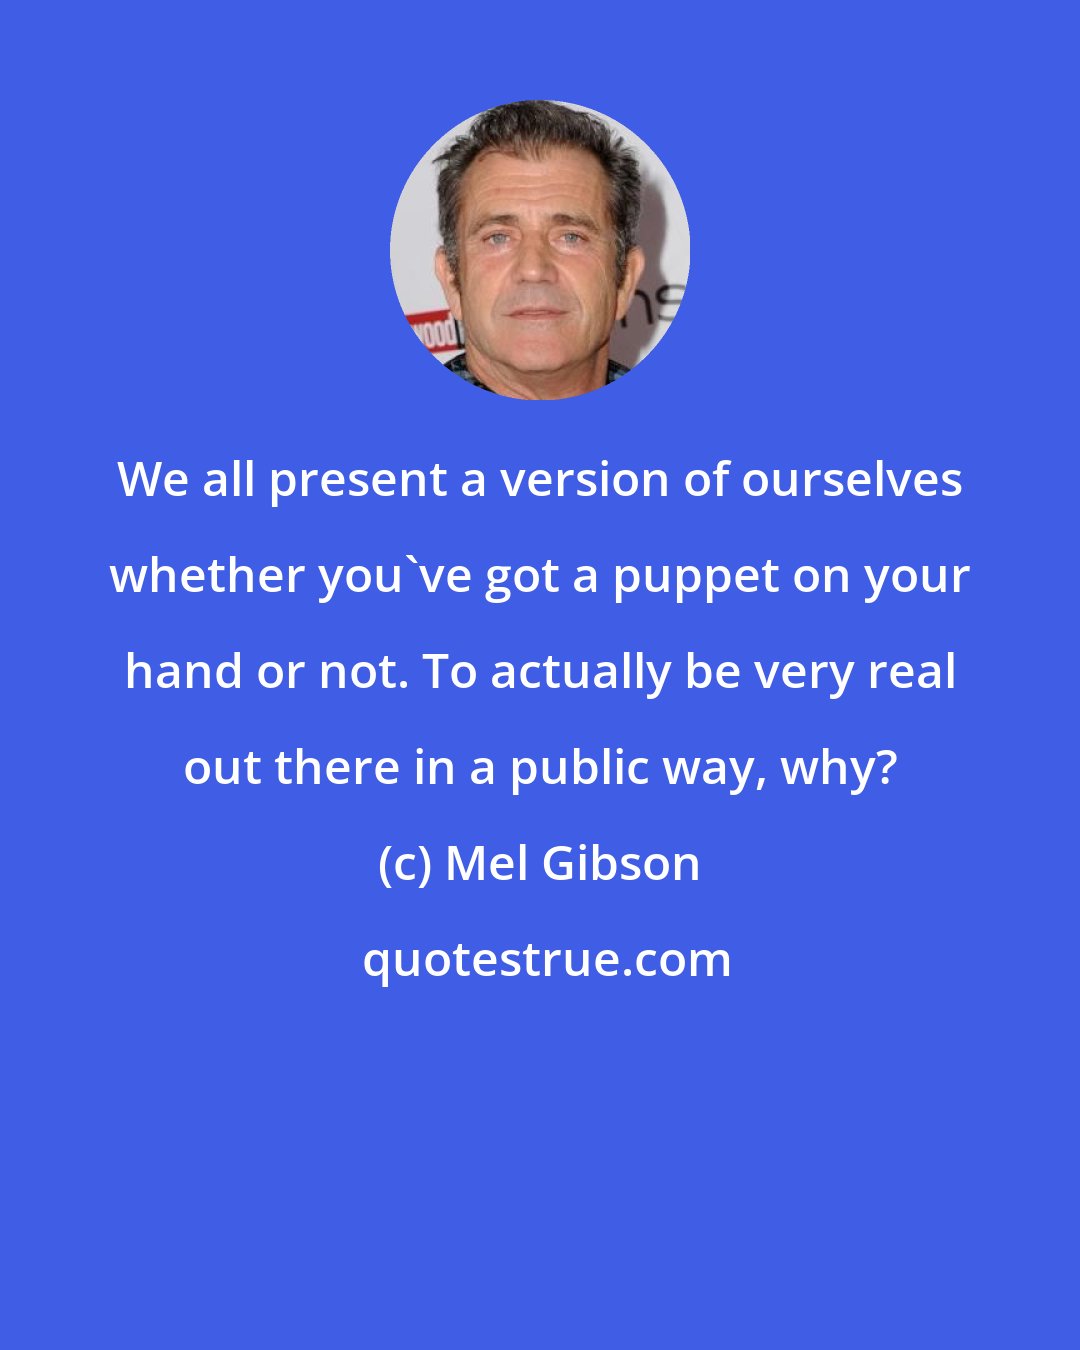 Mel Gibson: We all present a version of ourselves whether you've got a puppet on your hand or not. To actually be very real out there in a public way, why?